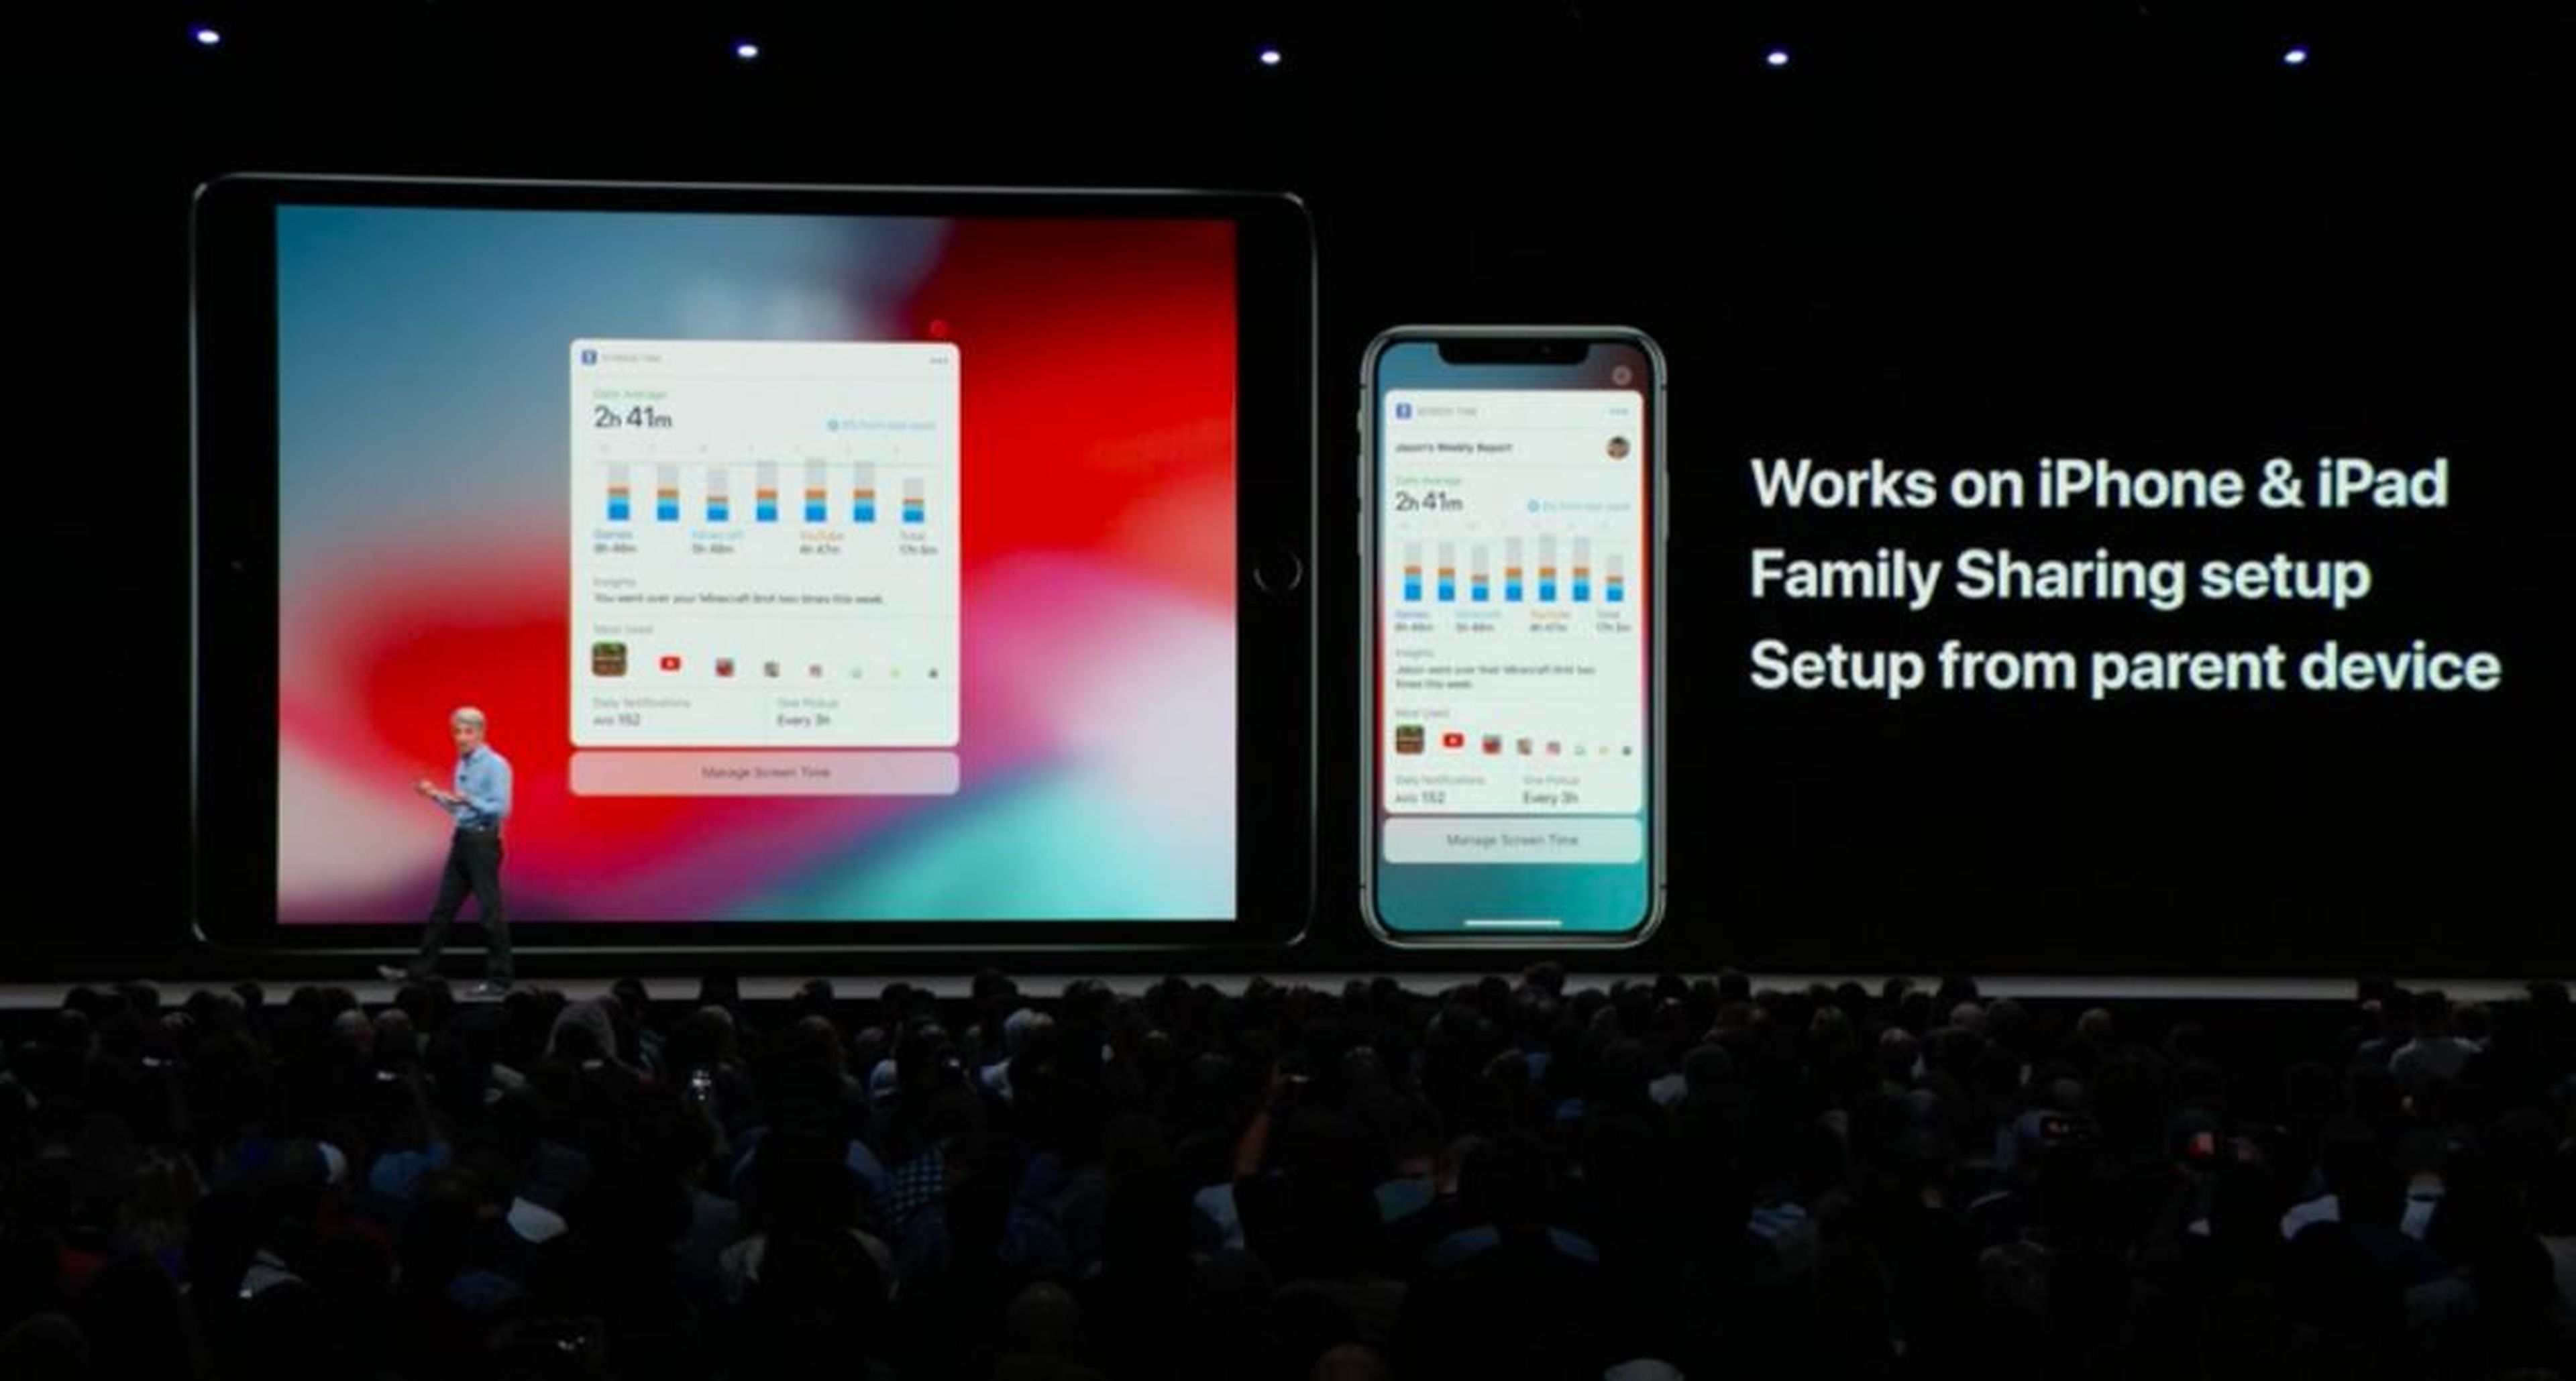 11. In iOS 12, you'll get a new app called Screentime, which gives you data and insights about how you spend time in your apps. You can see how often you're picking up your phone, which apps are drawing you in, and which apps are